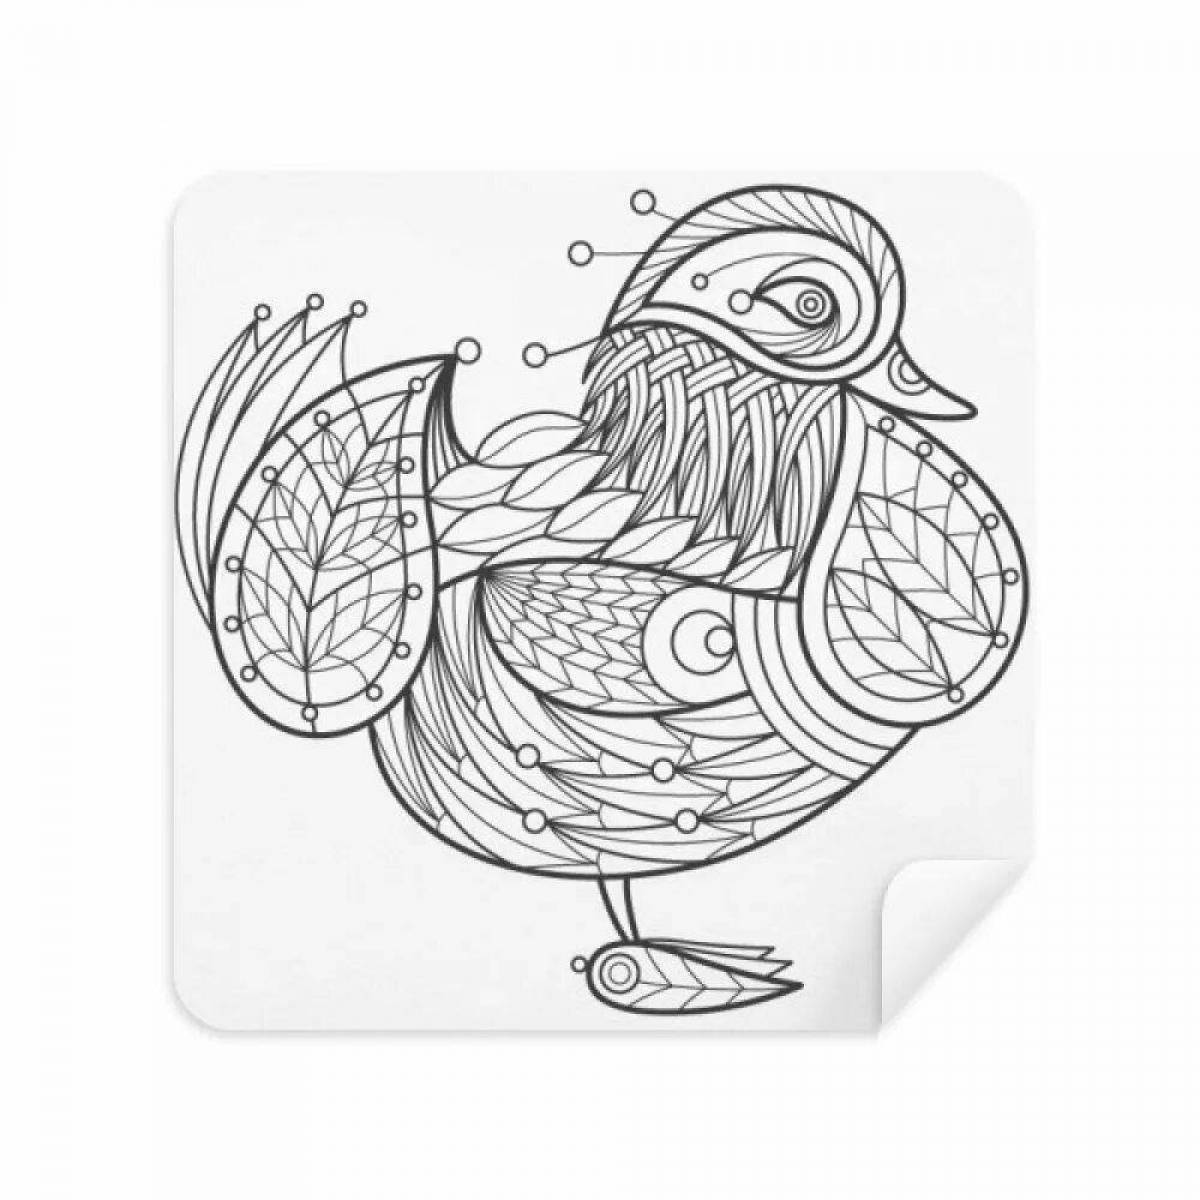 Gorgeous mandarin duck coloring book for kids